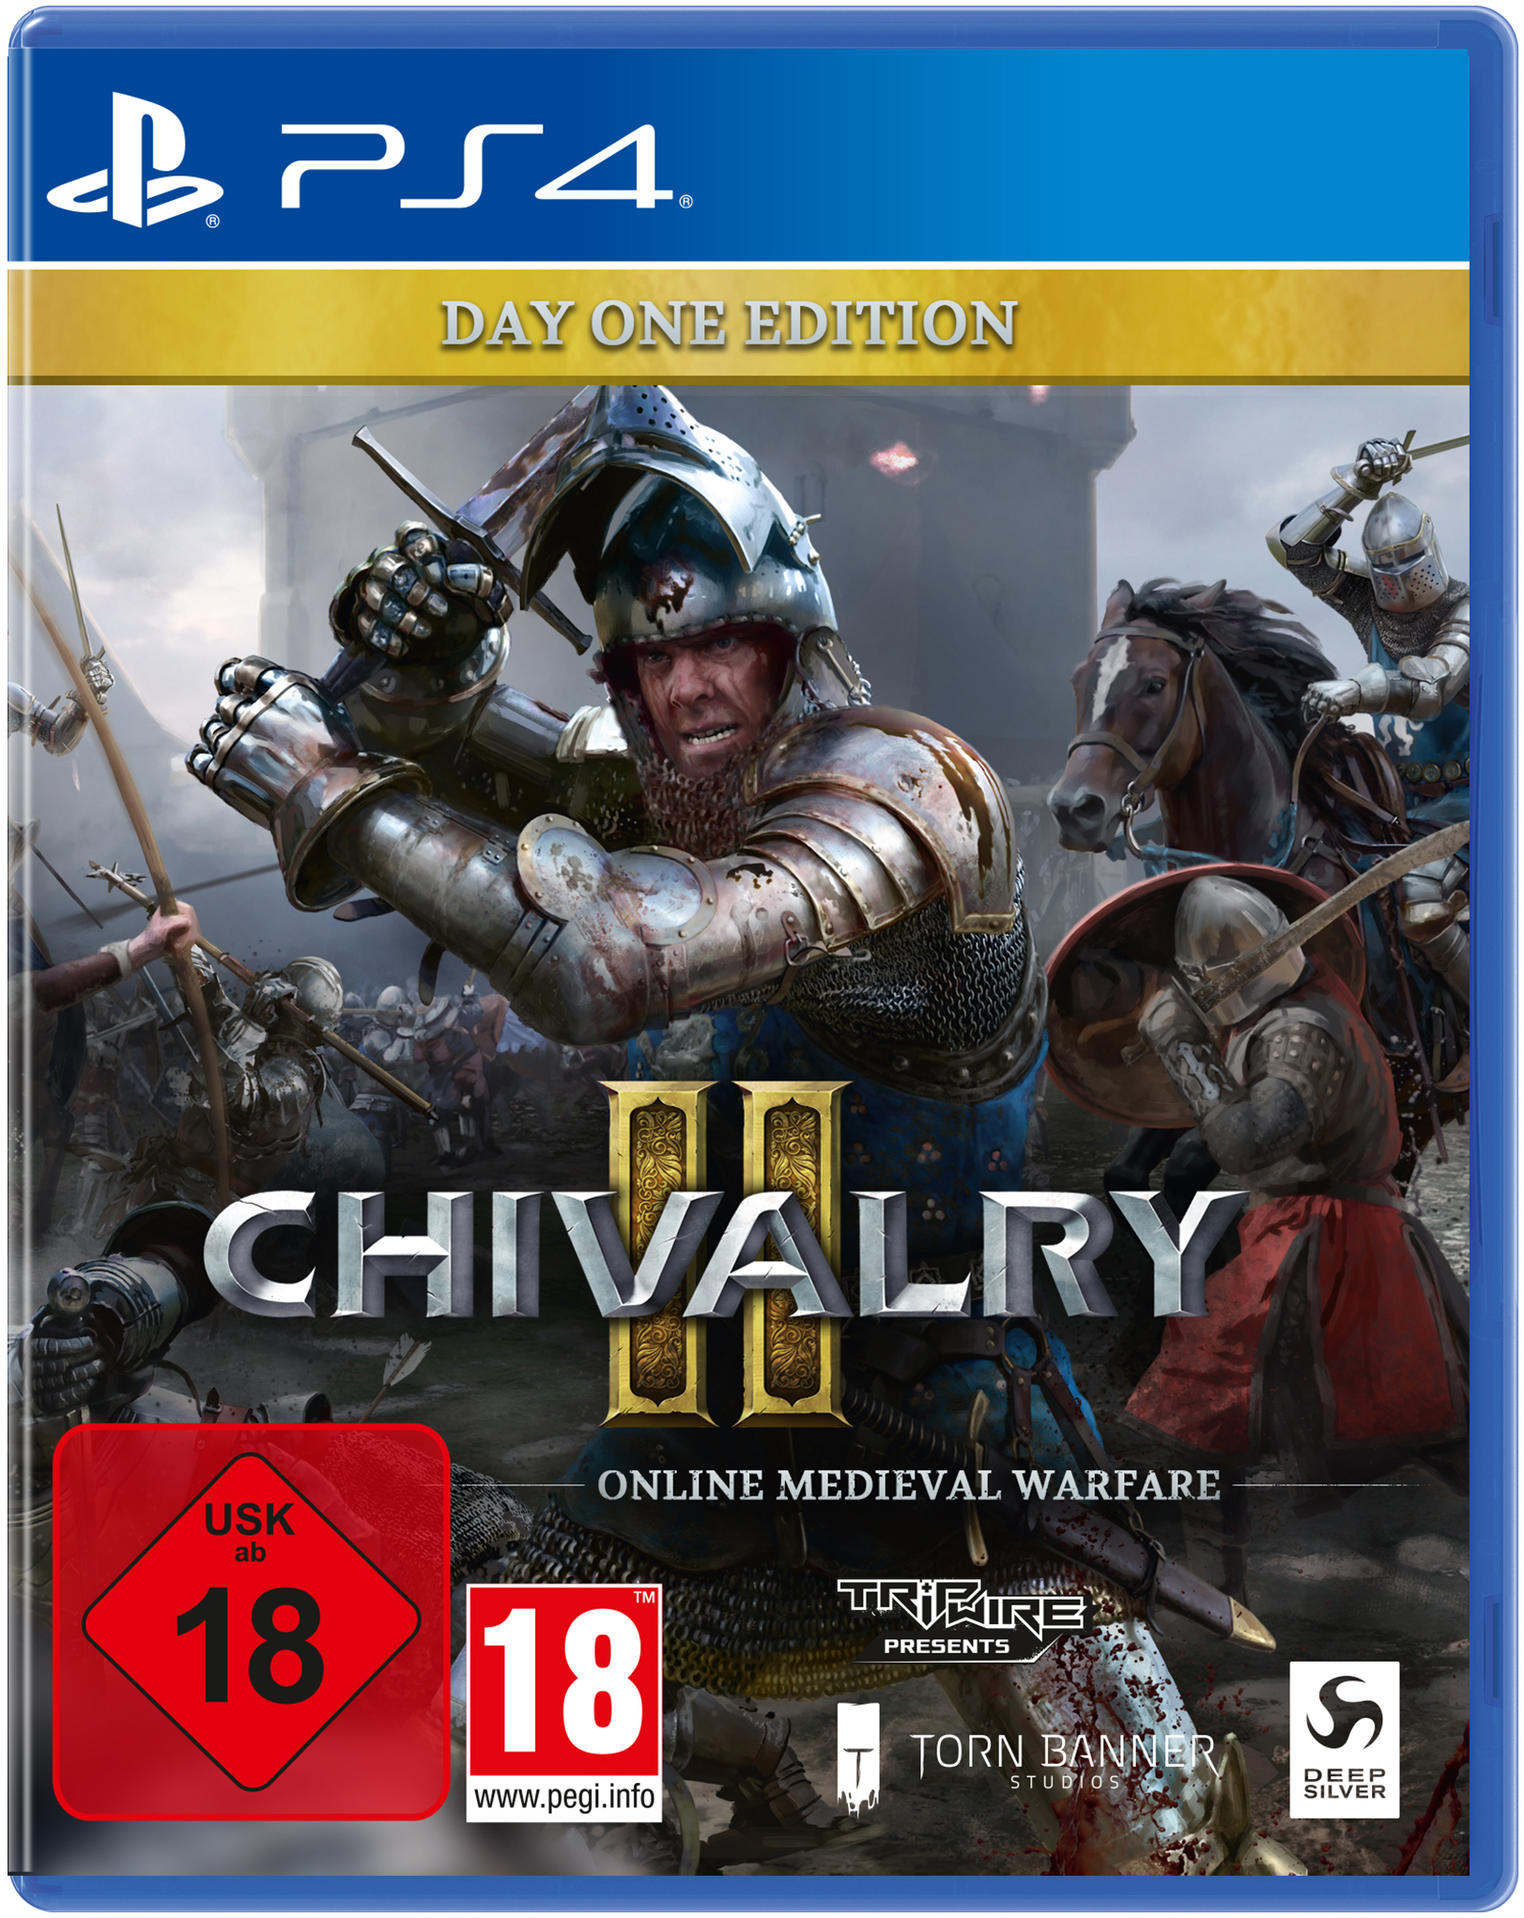 PS4 4] - CHIVALRY 2 [PlayStation